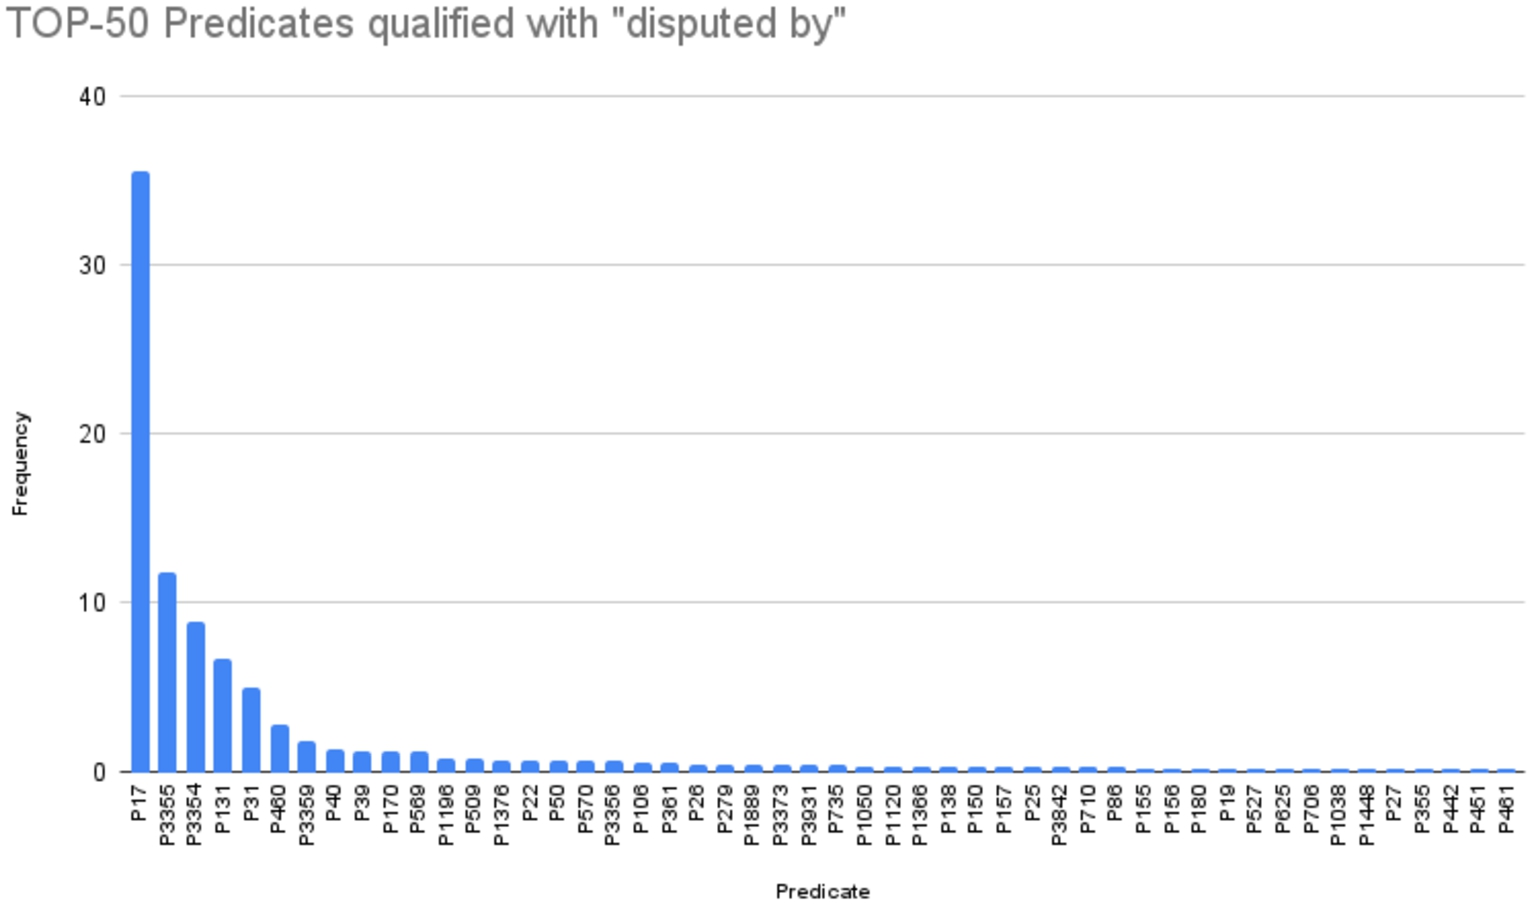 Top-50 most frequent properties in claims qualified with disputed by.